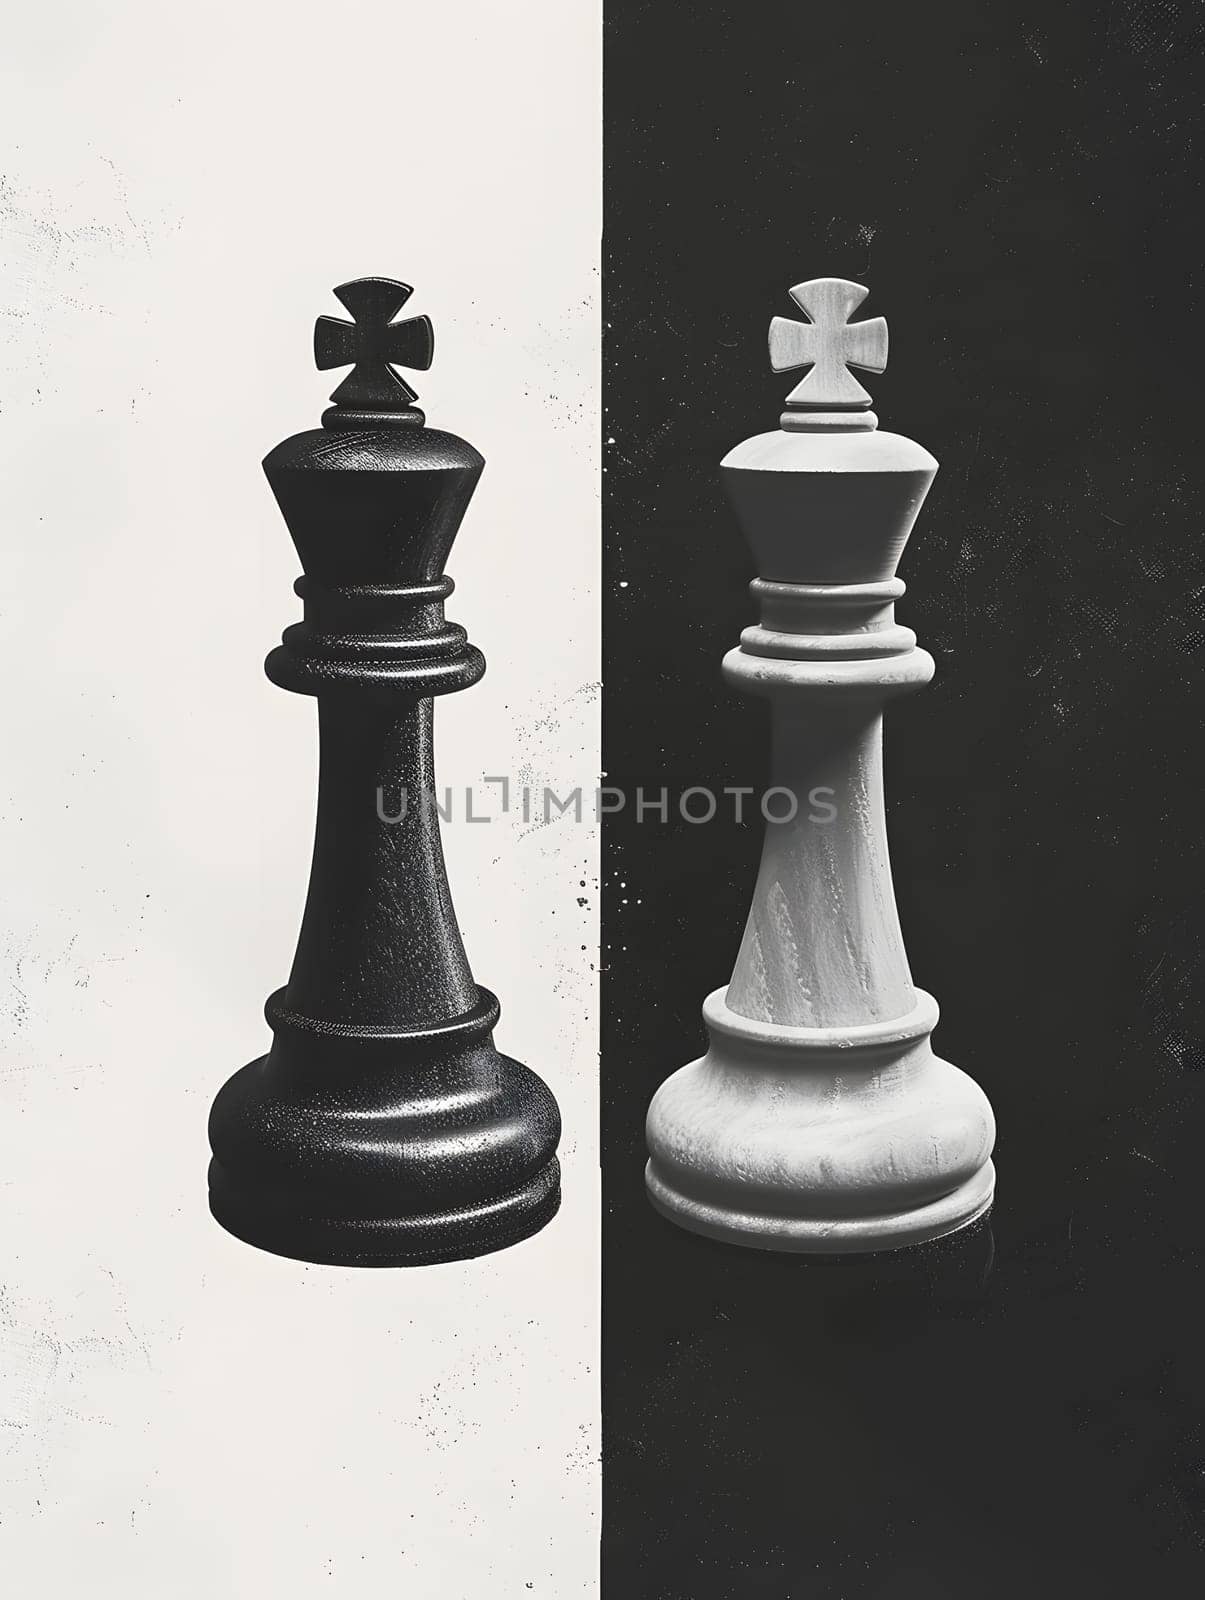 Monochrome photo of two chess pieces on black tabletop by Nadtochiy